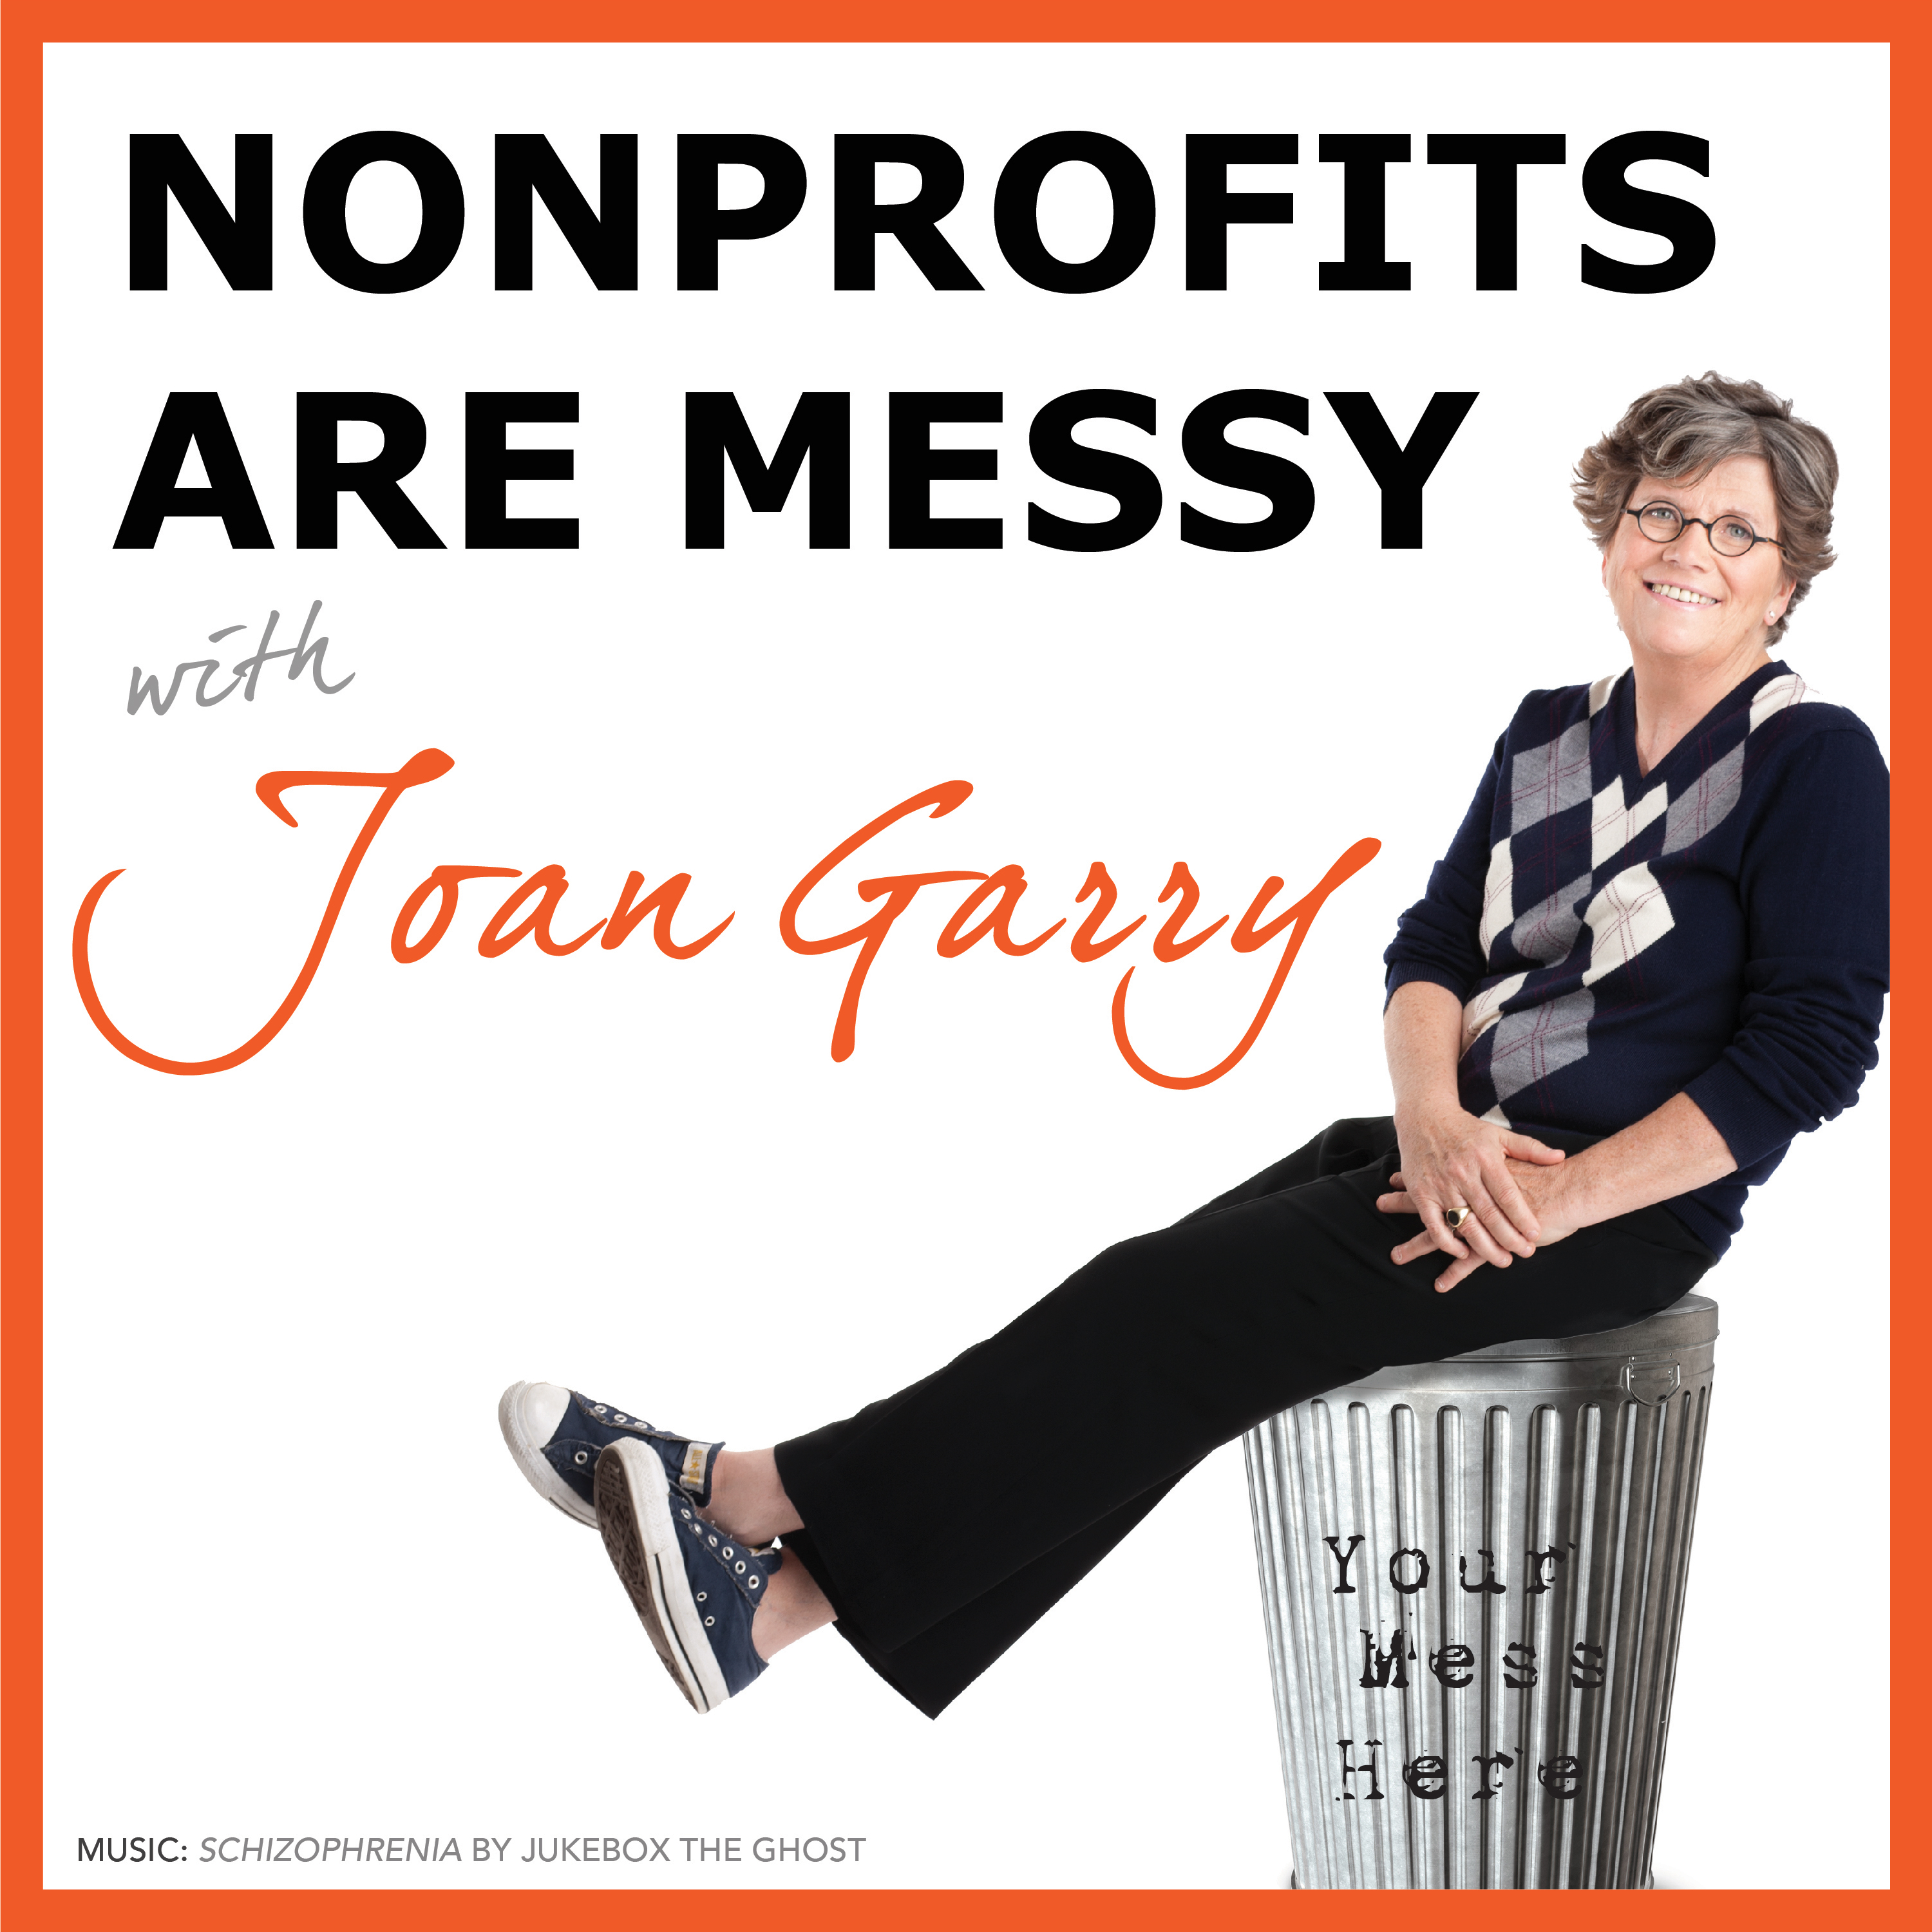 A highlight from Ep 149: Can We Fix the Nonprofit Burnout Problem? (with Chris Barlics)